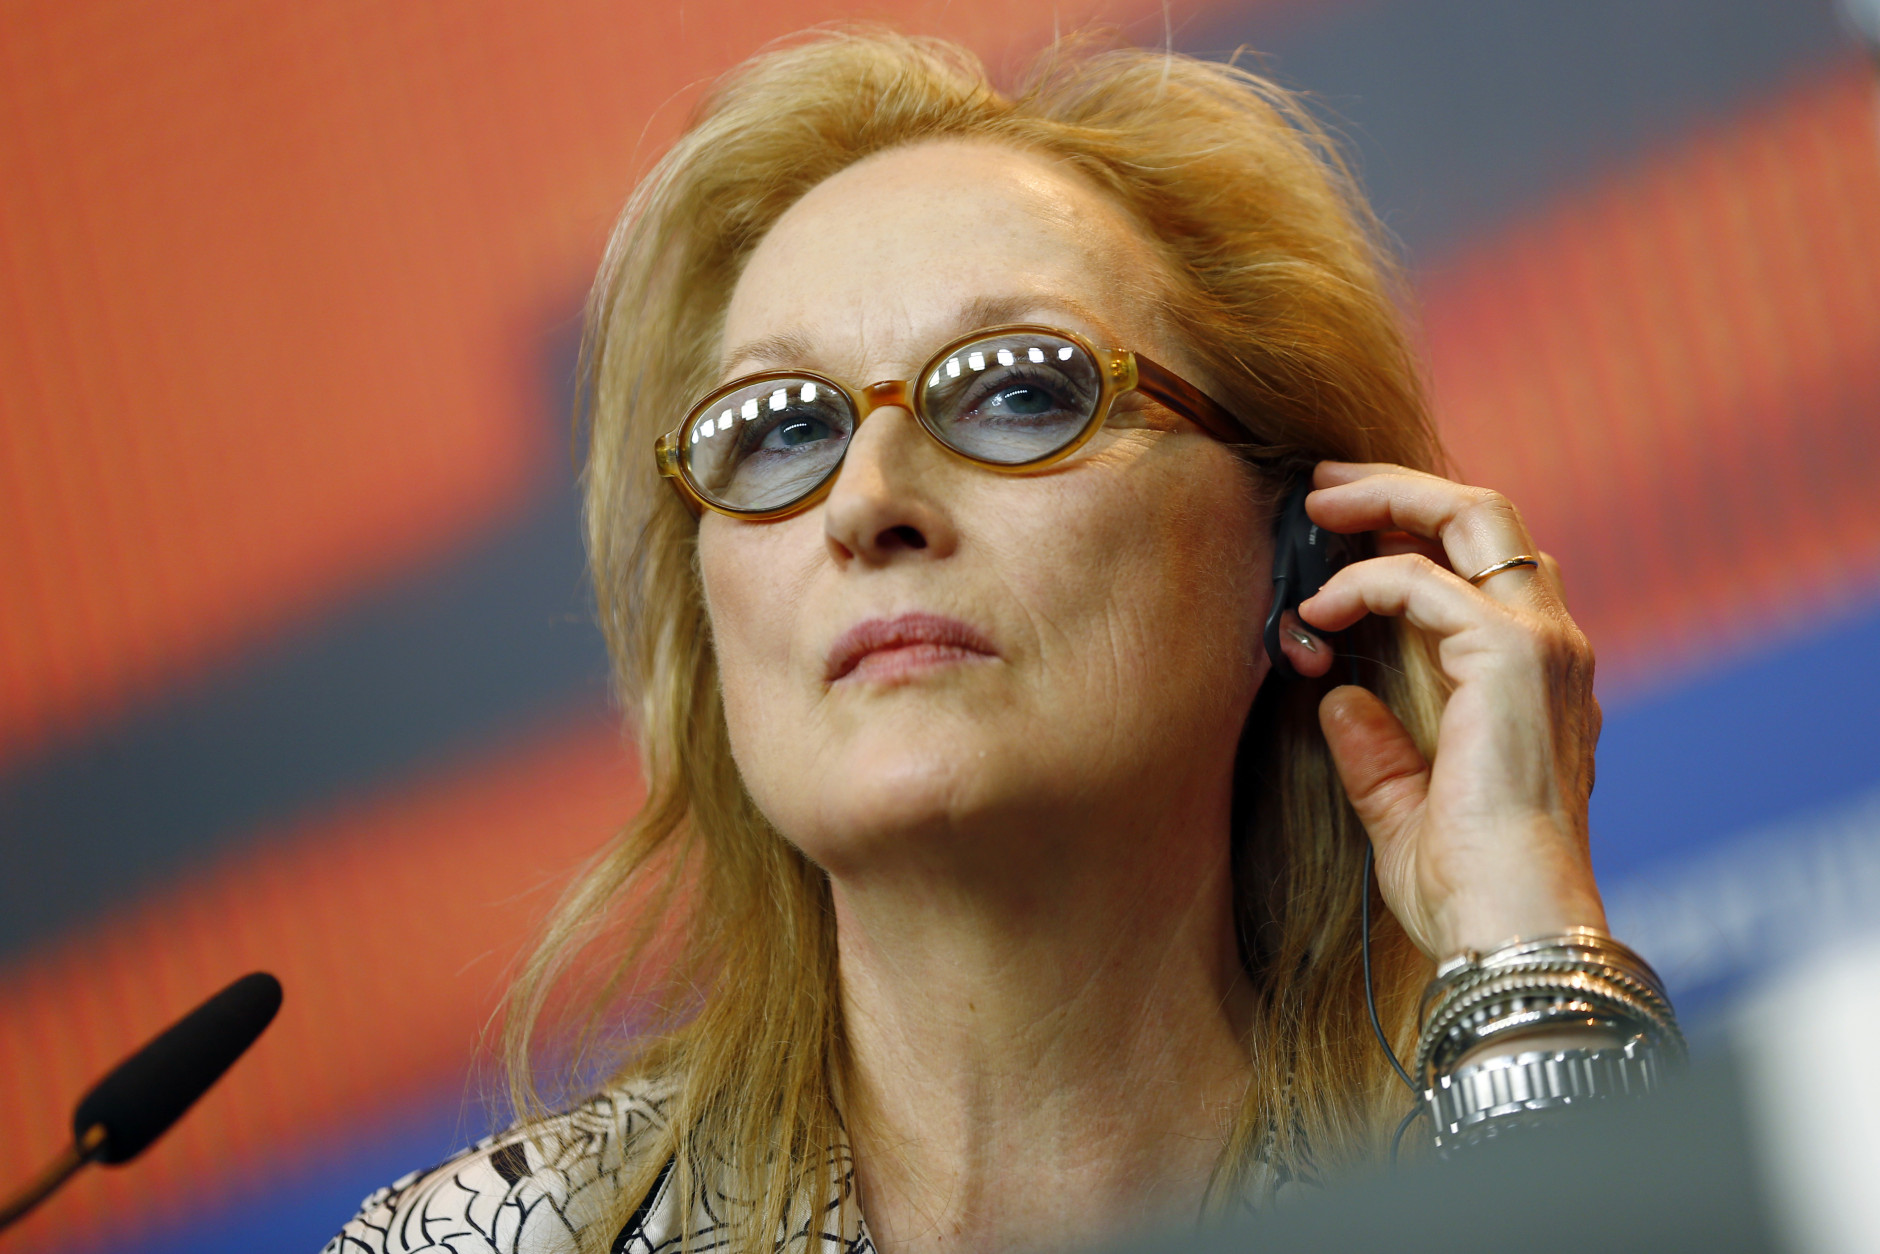 FILE - In this Thursday, Feb. 11, 2016 file photo, Jury President Meryl Streep attends a press conference at the 2016 Berlinale Film Festival in Berlin, Germany, Thursday, Feb. 11, 2016. After more than a week of red-carpet screenings, the jury at the Berlin International Film Festival is set to announce the winner of its Golden Bear award for best movie and other honors. Winners at the Berlinale, the first of the year's major European film festivals, are notoriously hard to predict. This year's jury, led by Meryl Streep, is choosing between 18 entries from across the globe.  (AP Photo/Axel Schmidt, File)